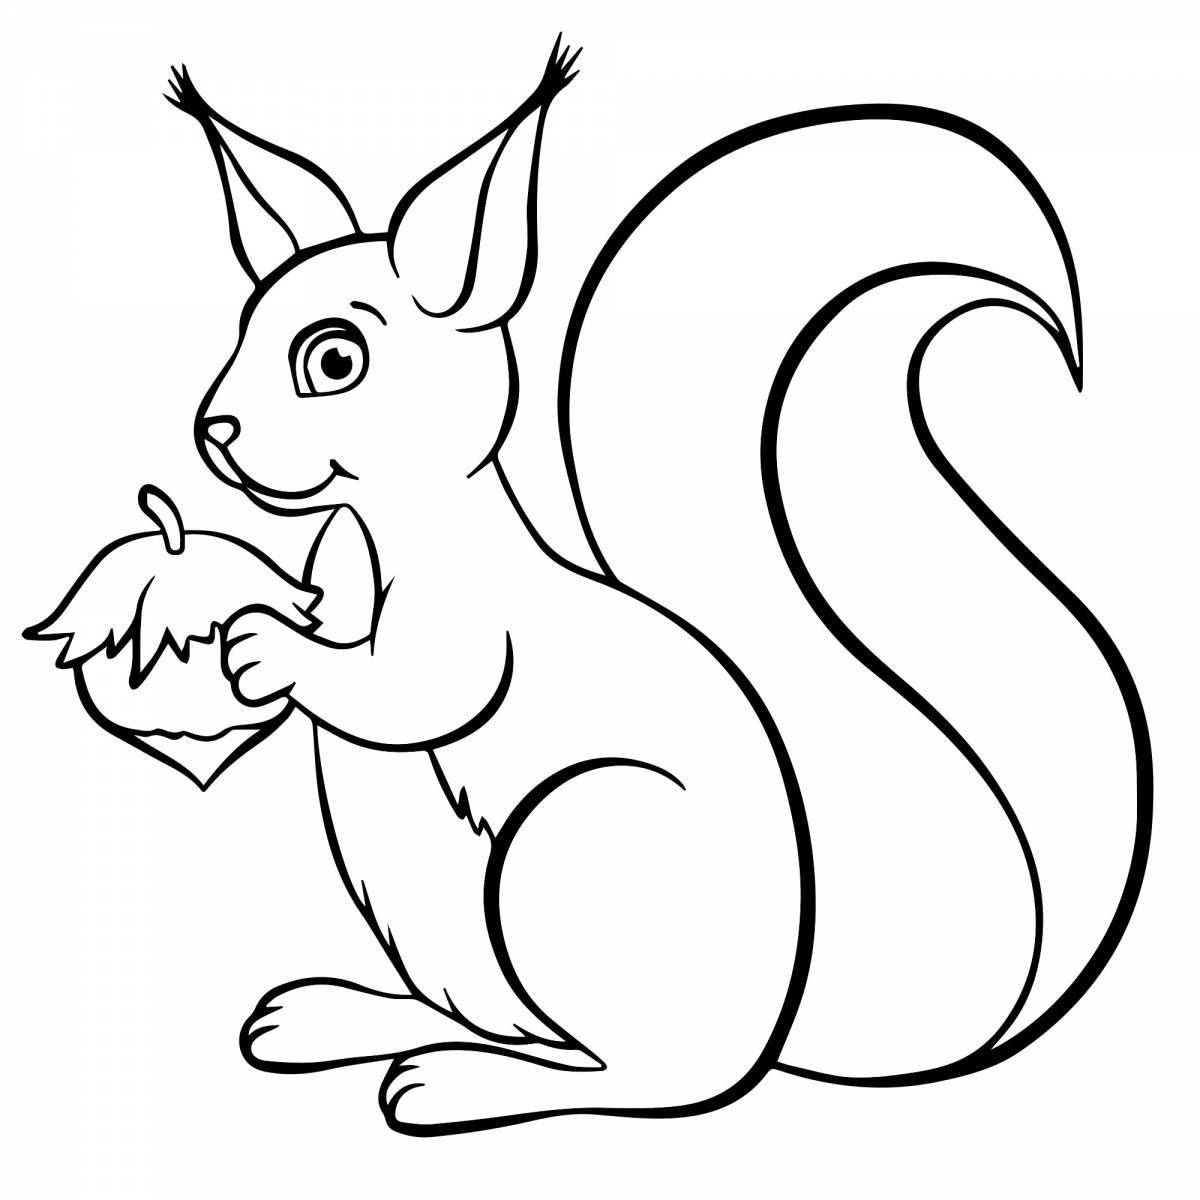 Adorable squirrel coloring book for 4-5 year olds